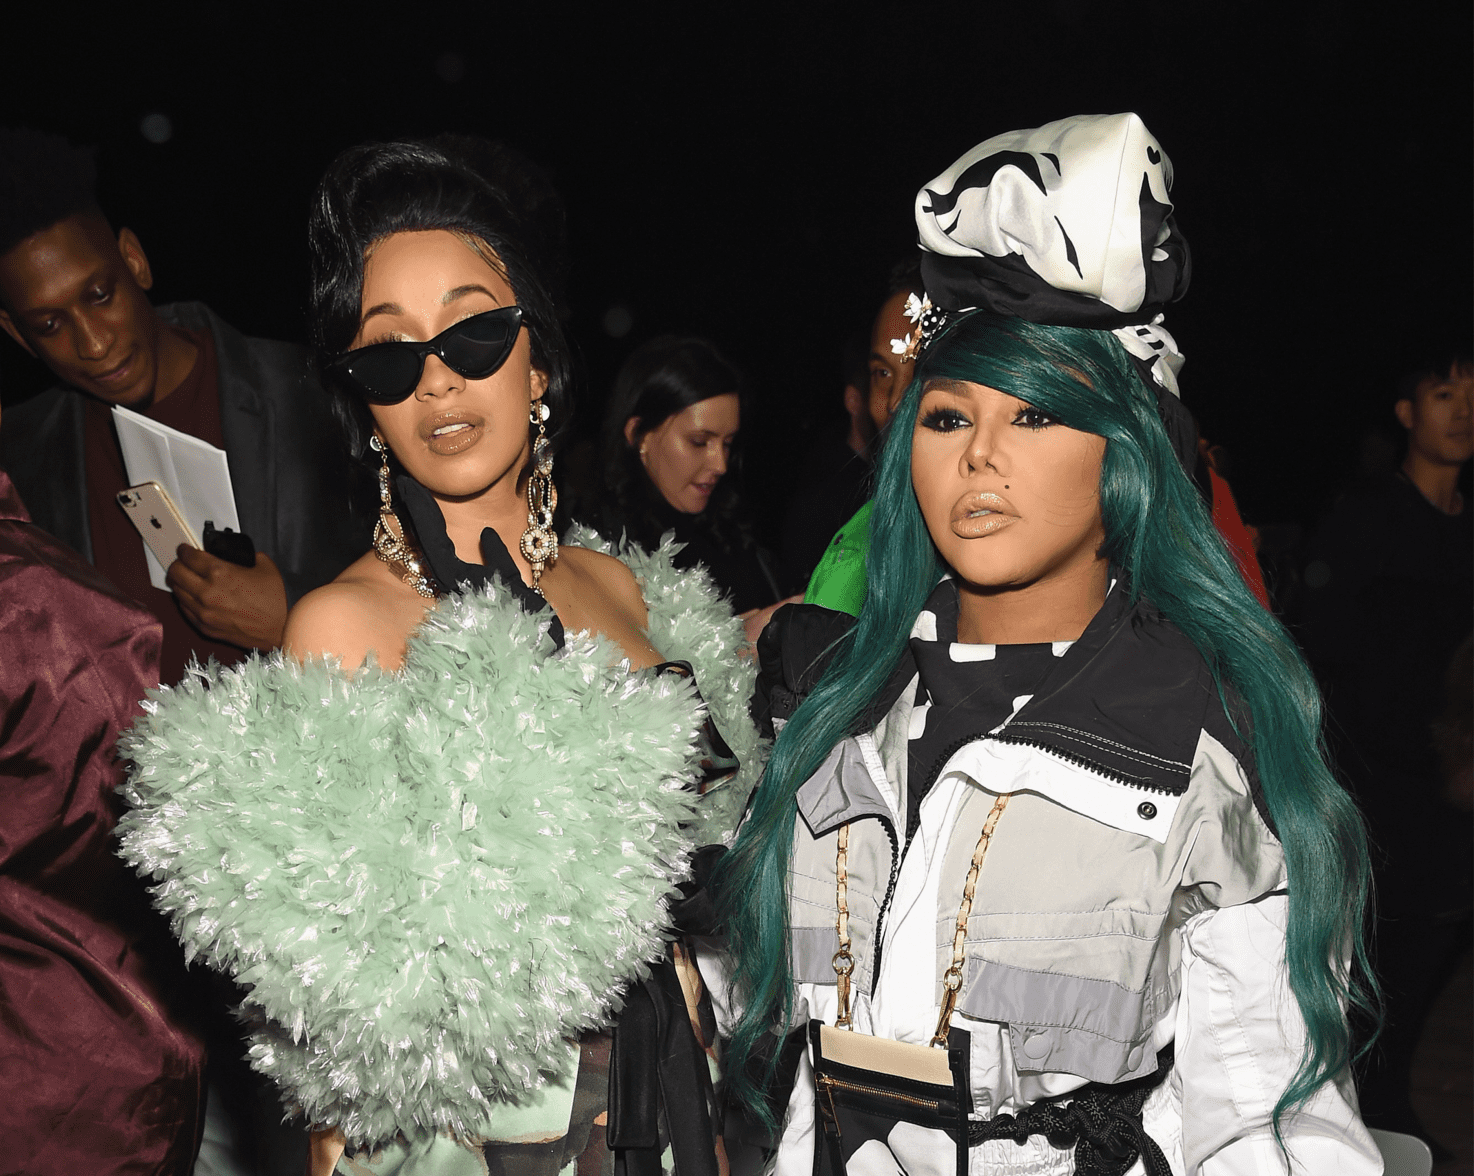 ”cardi-b-talks-about-lil-kim-and-hits-fans-with-a-surprise”